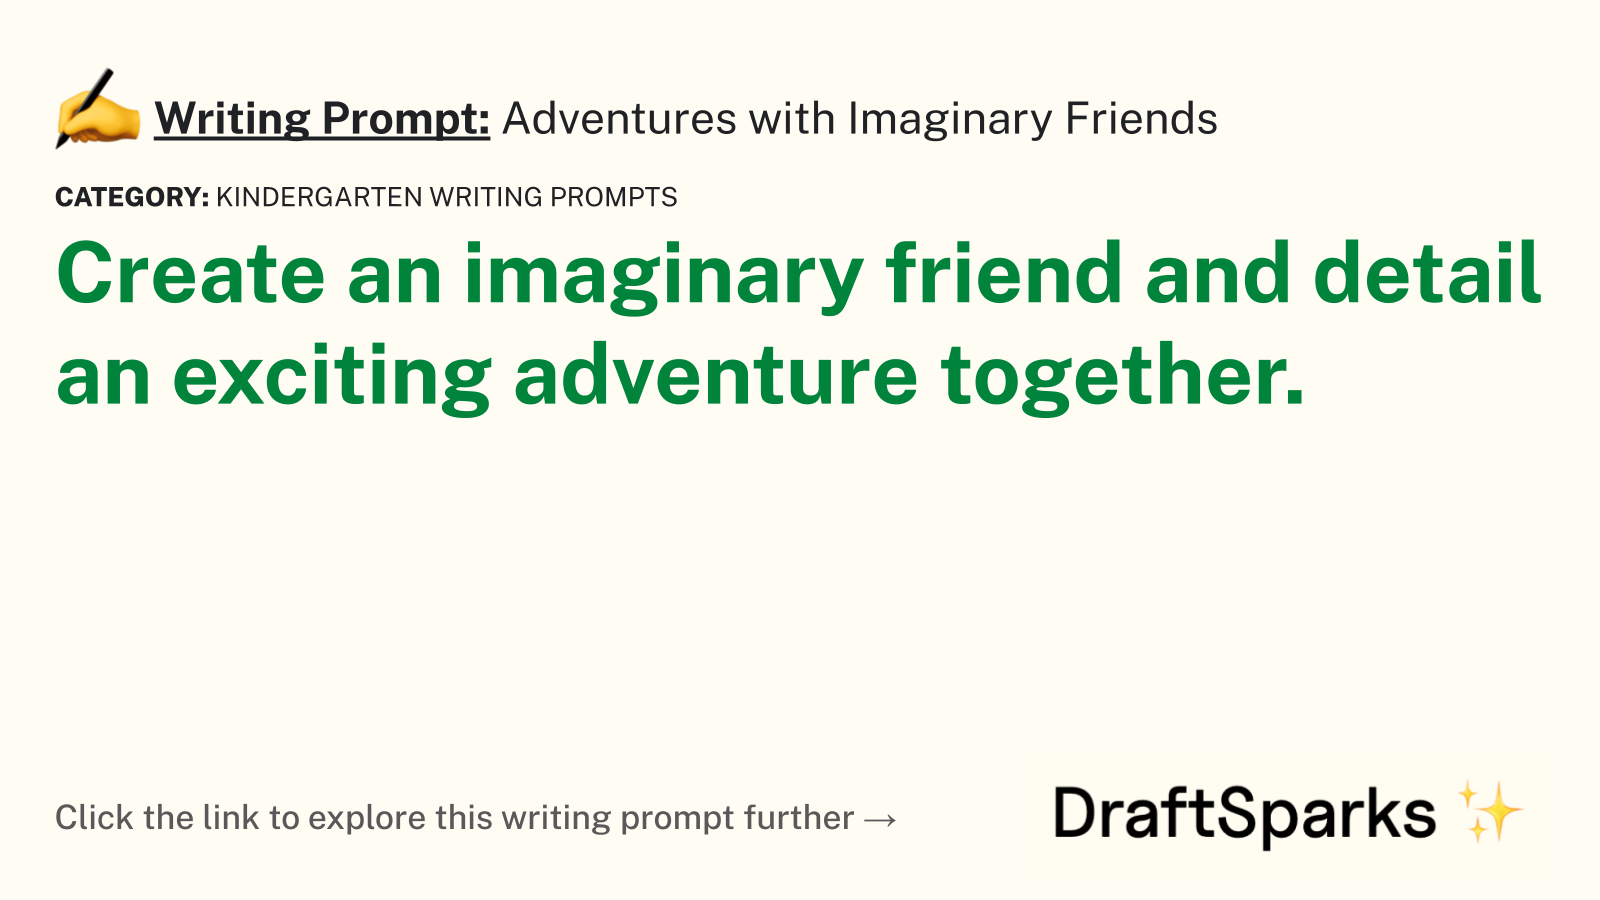 Adventures with Imaginary Friends